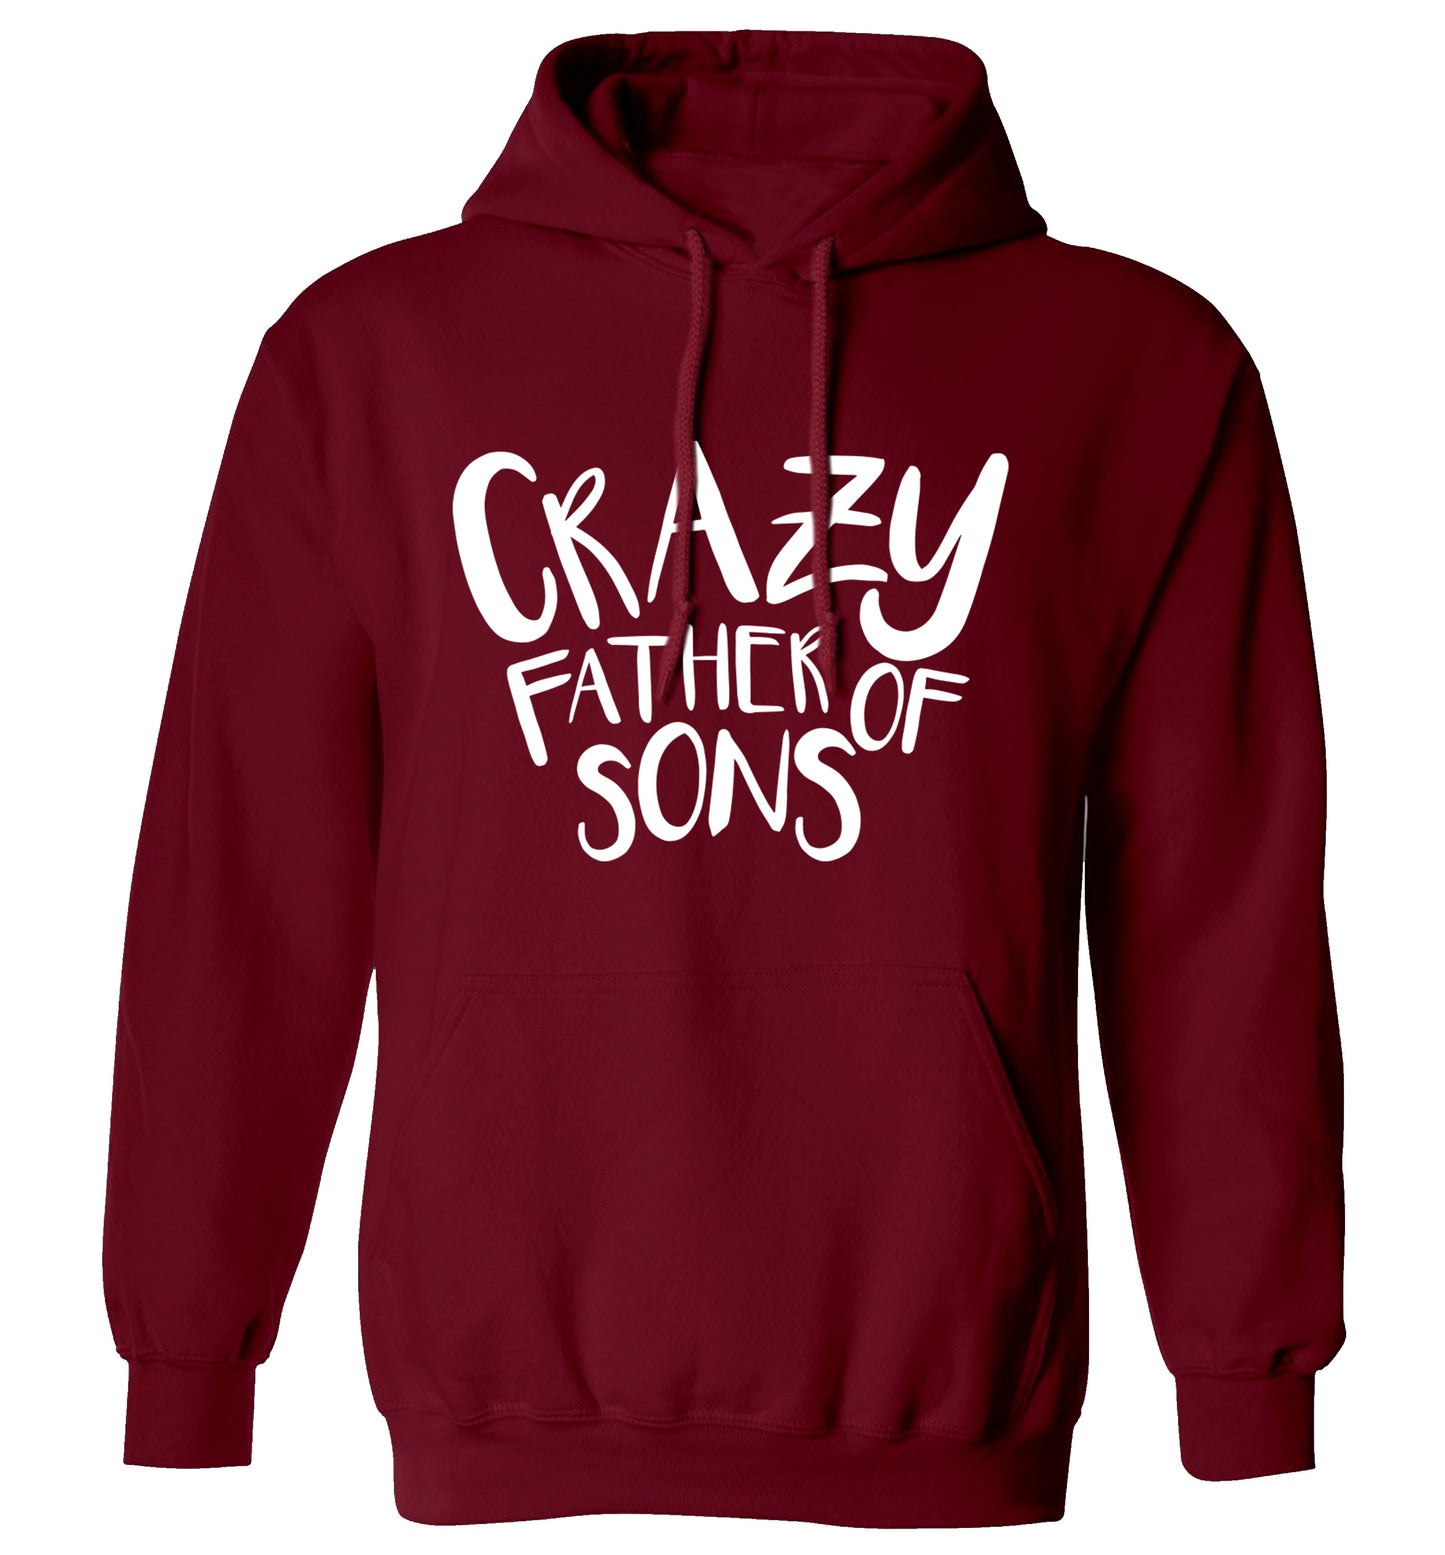 Crazy father of sons adults unisex maroon hoodie 2XL